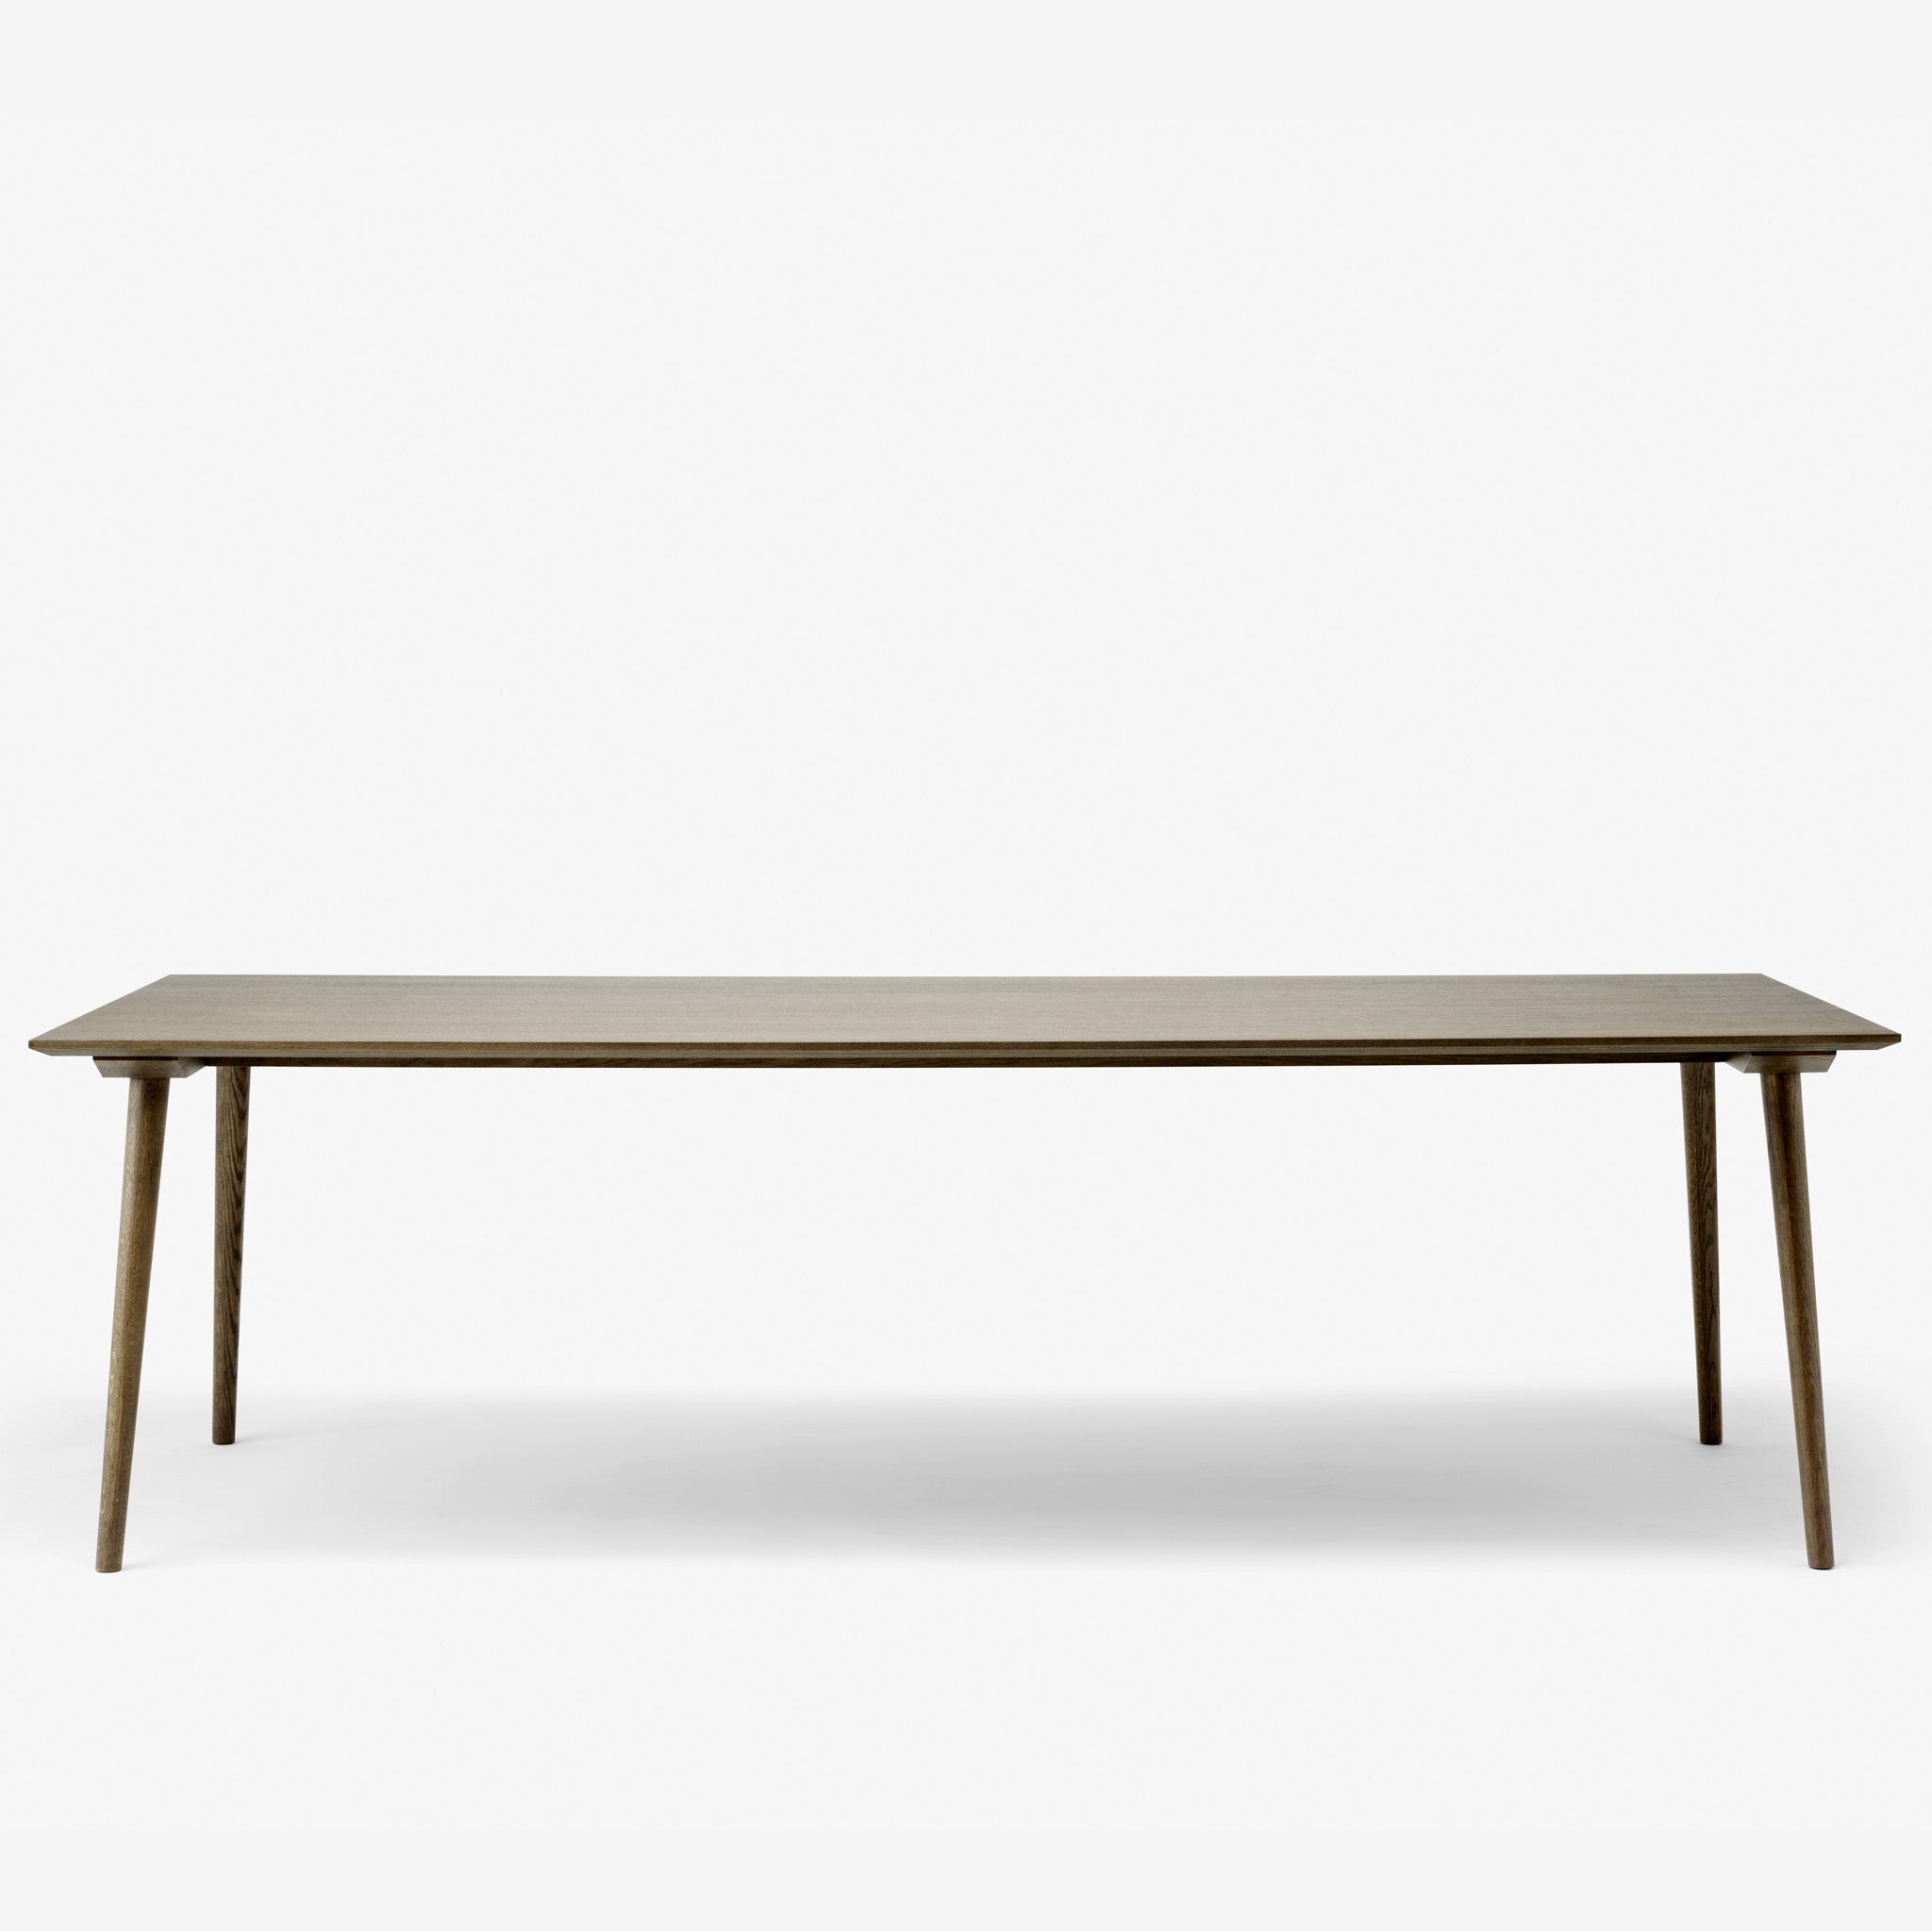 In Between Rectangular Dining Tables SK5 and SK6 by &Tradition